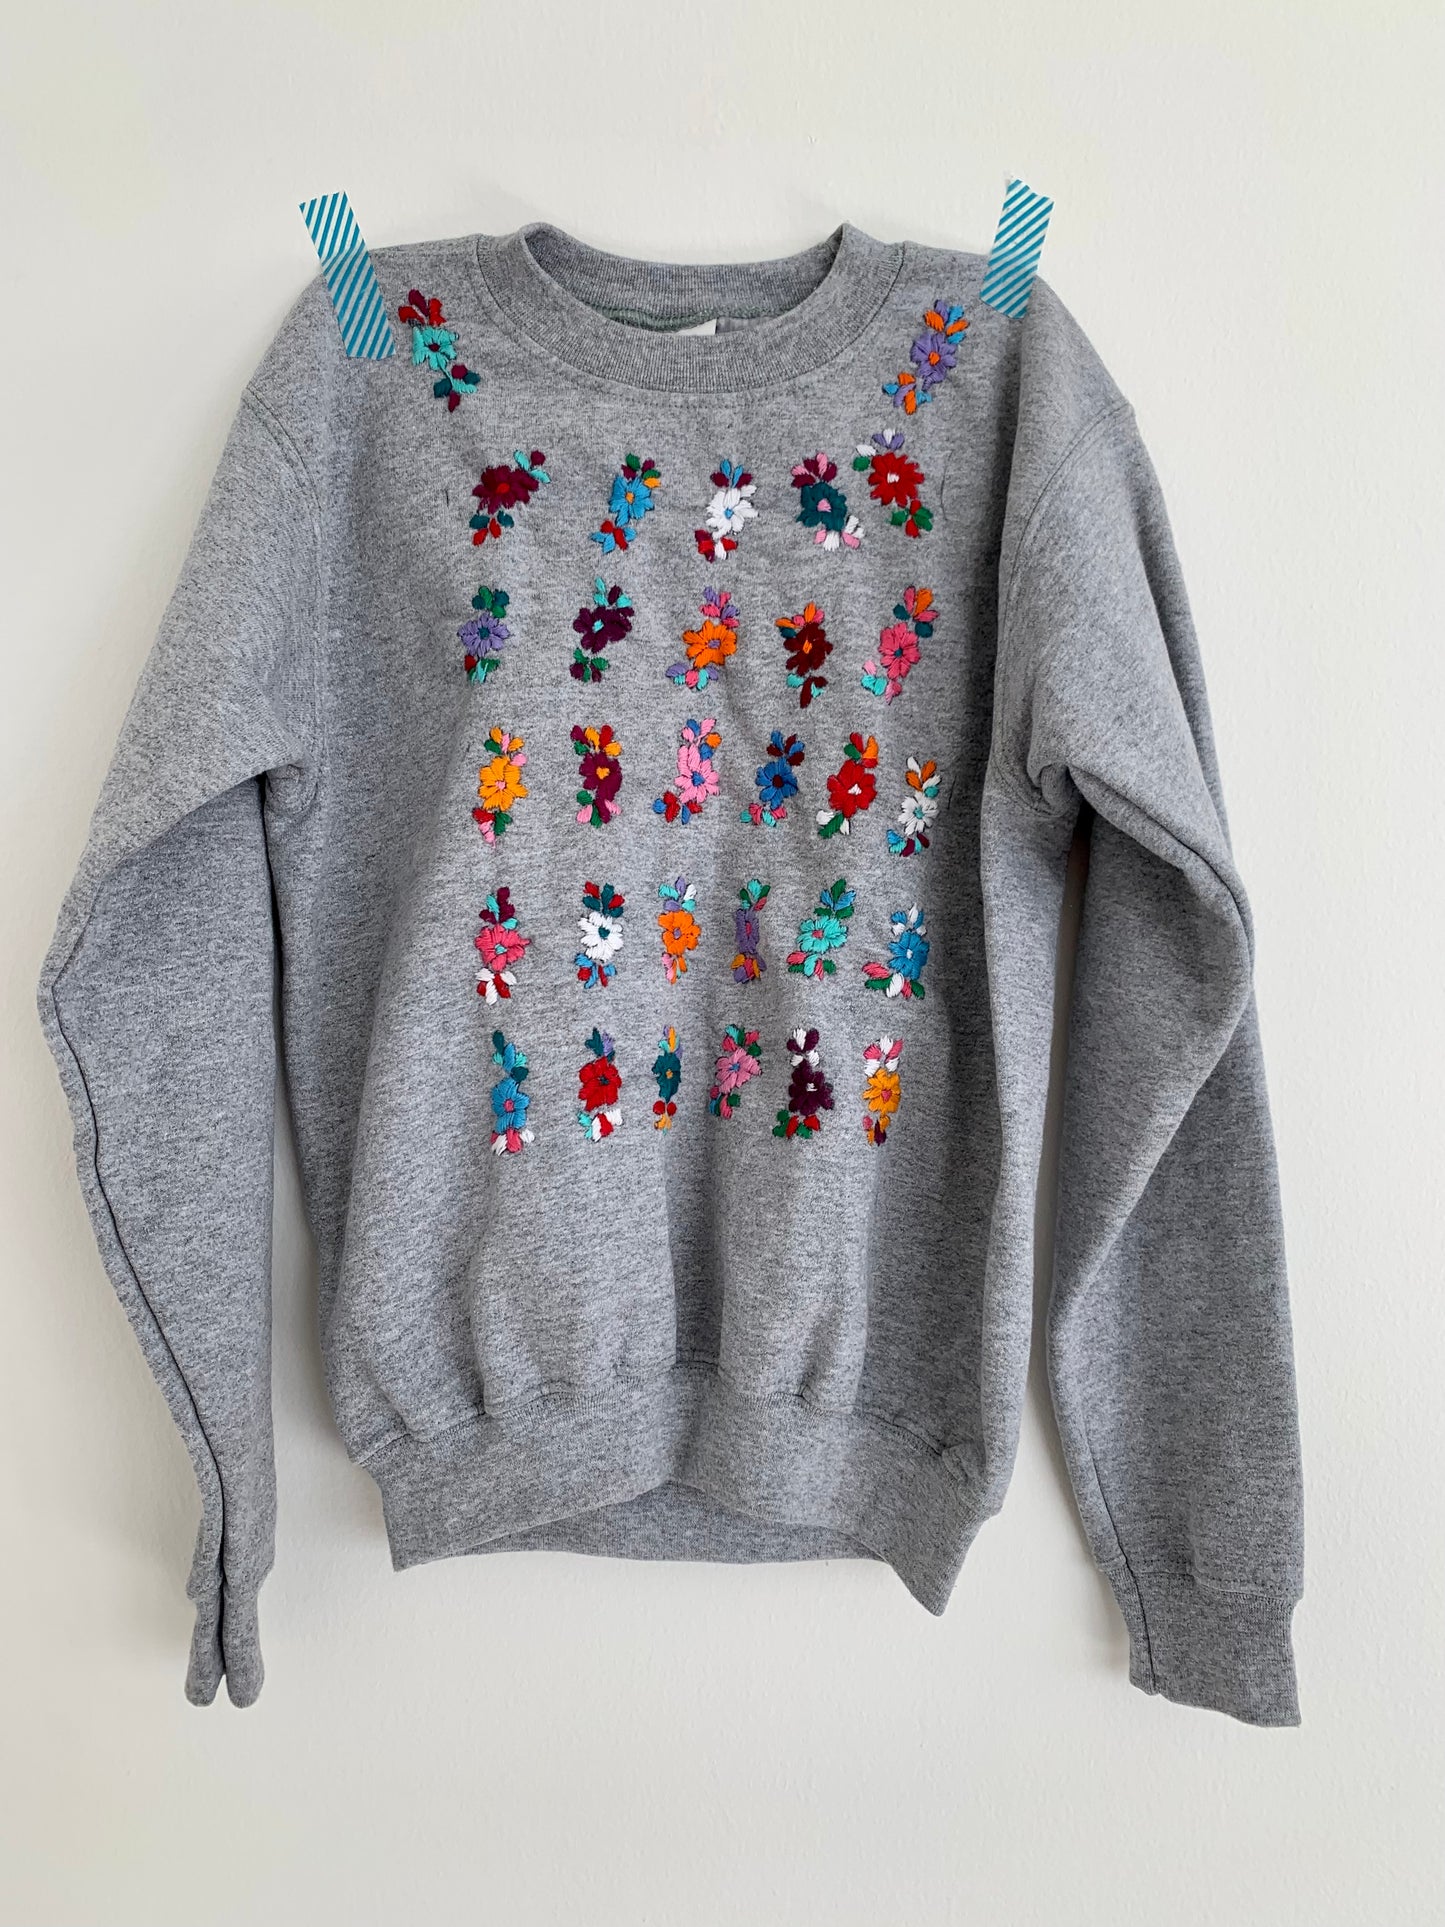 Adult hand embroidered floral sweatshirt